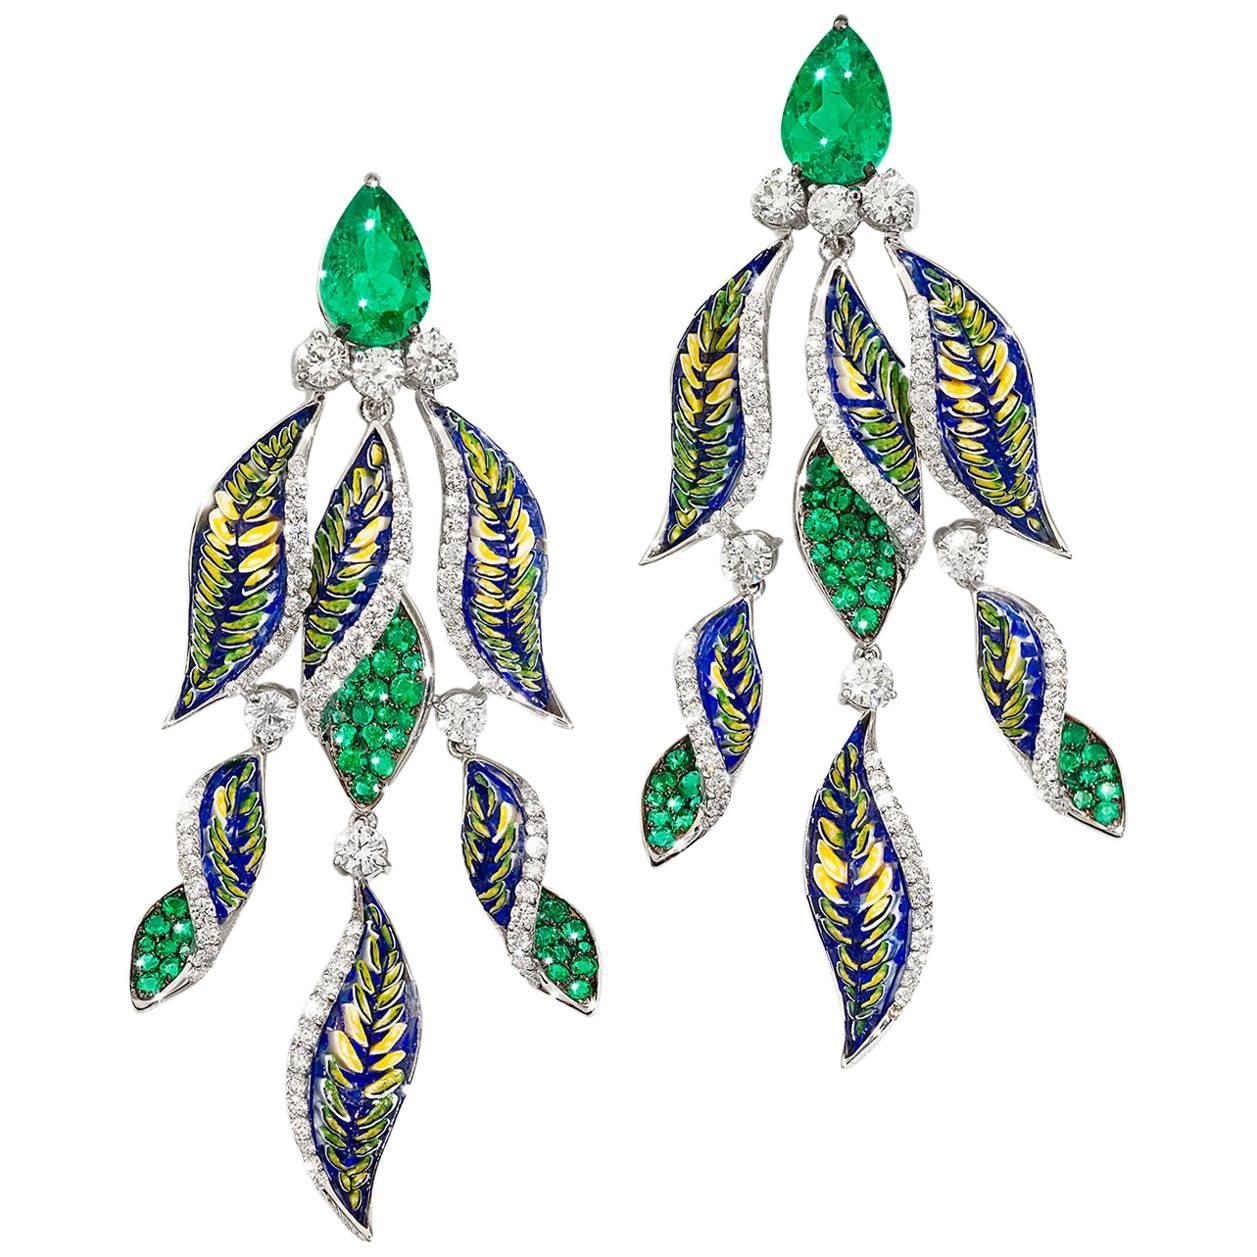 Earrings White Gold White Diamonds Pear Cut Emeralds Decorated with Nanomosaic 